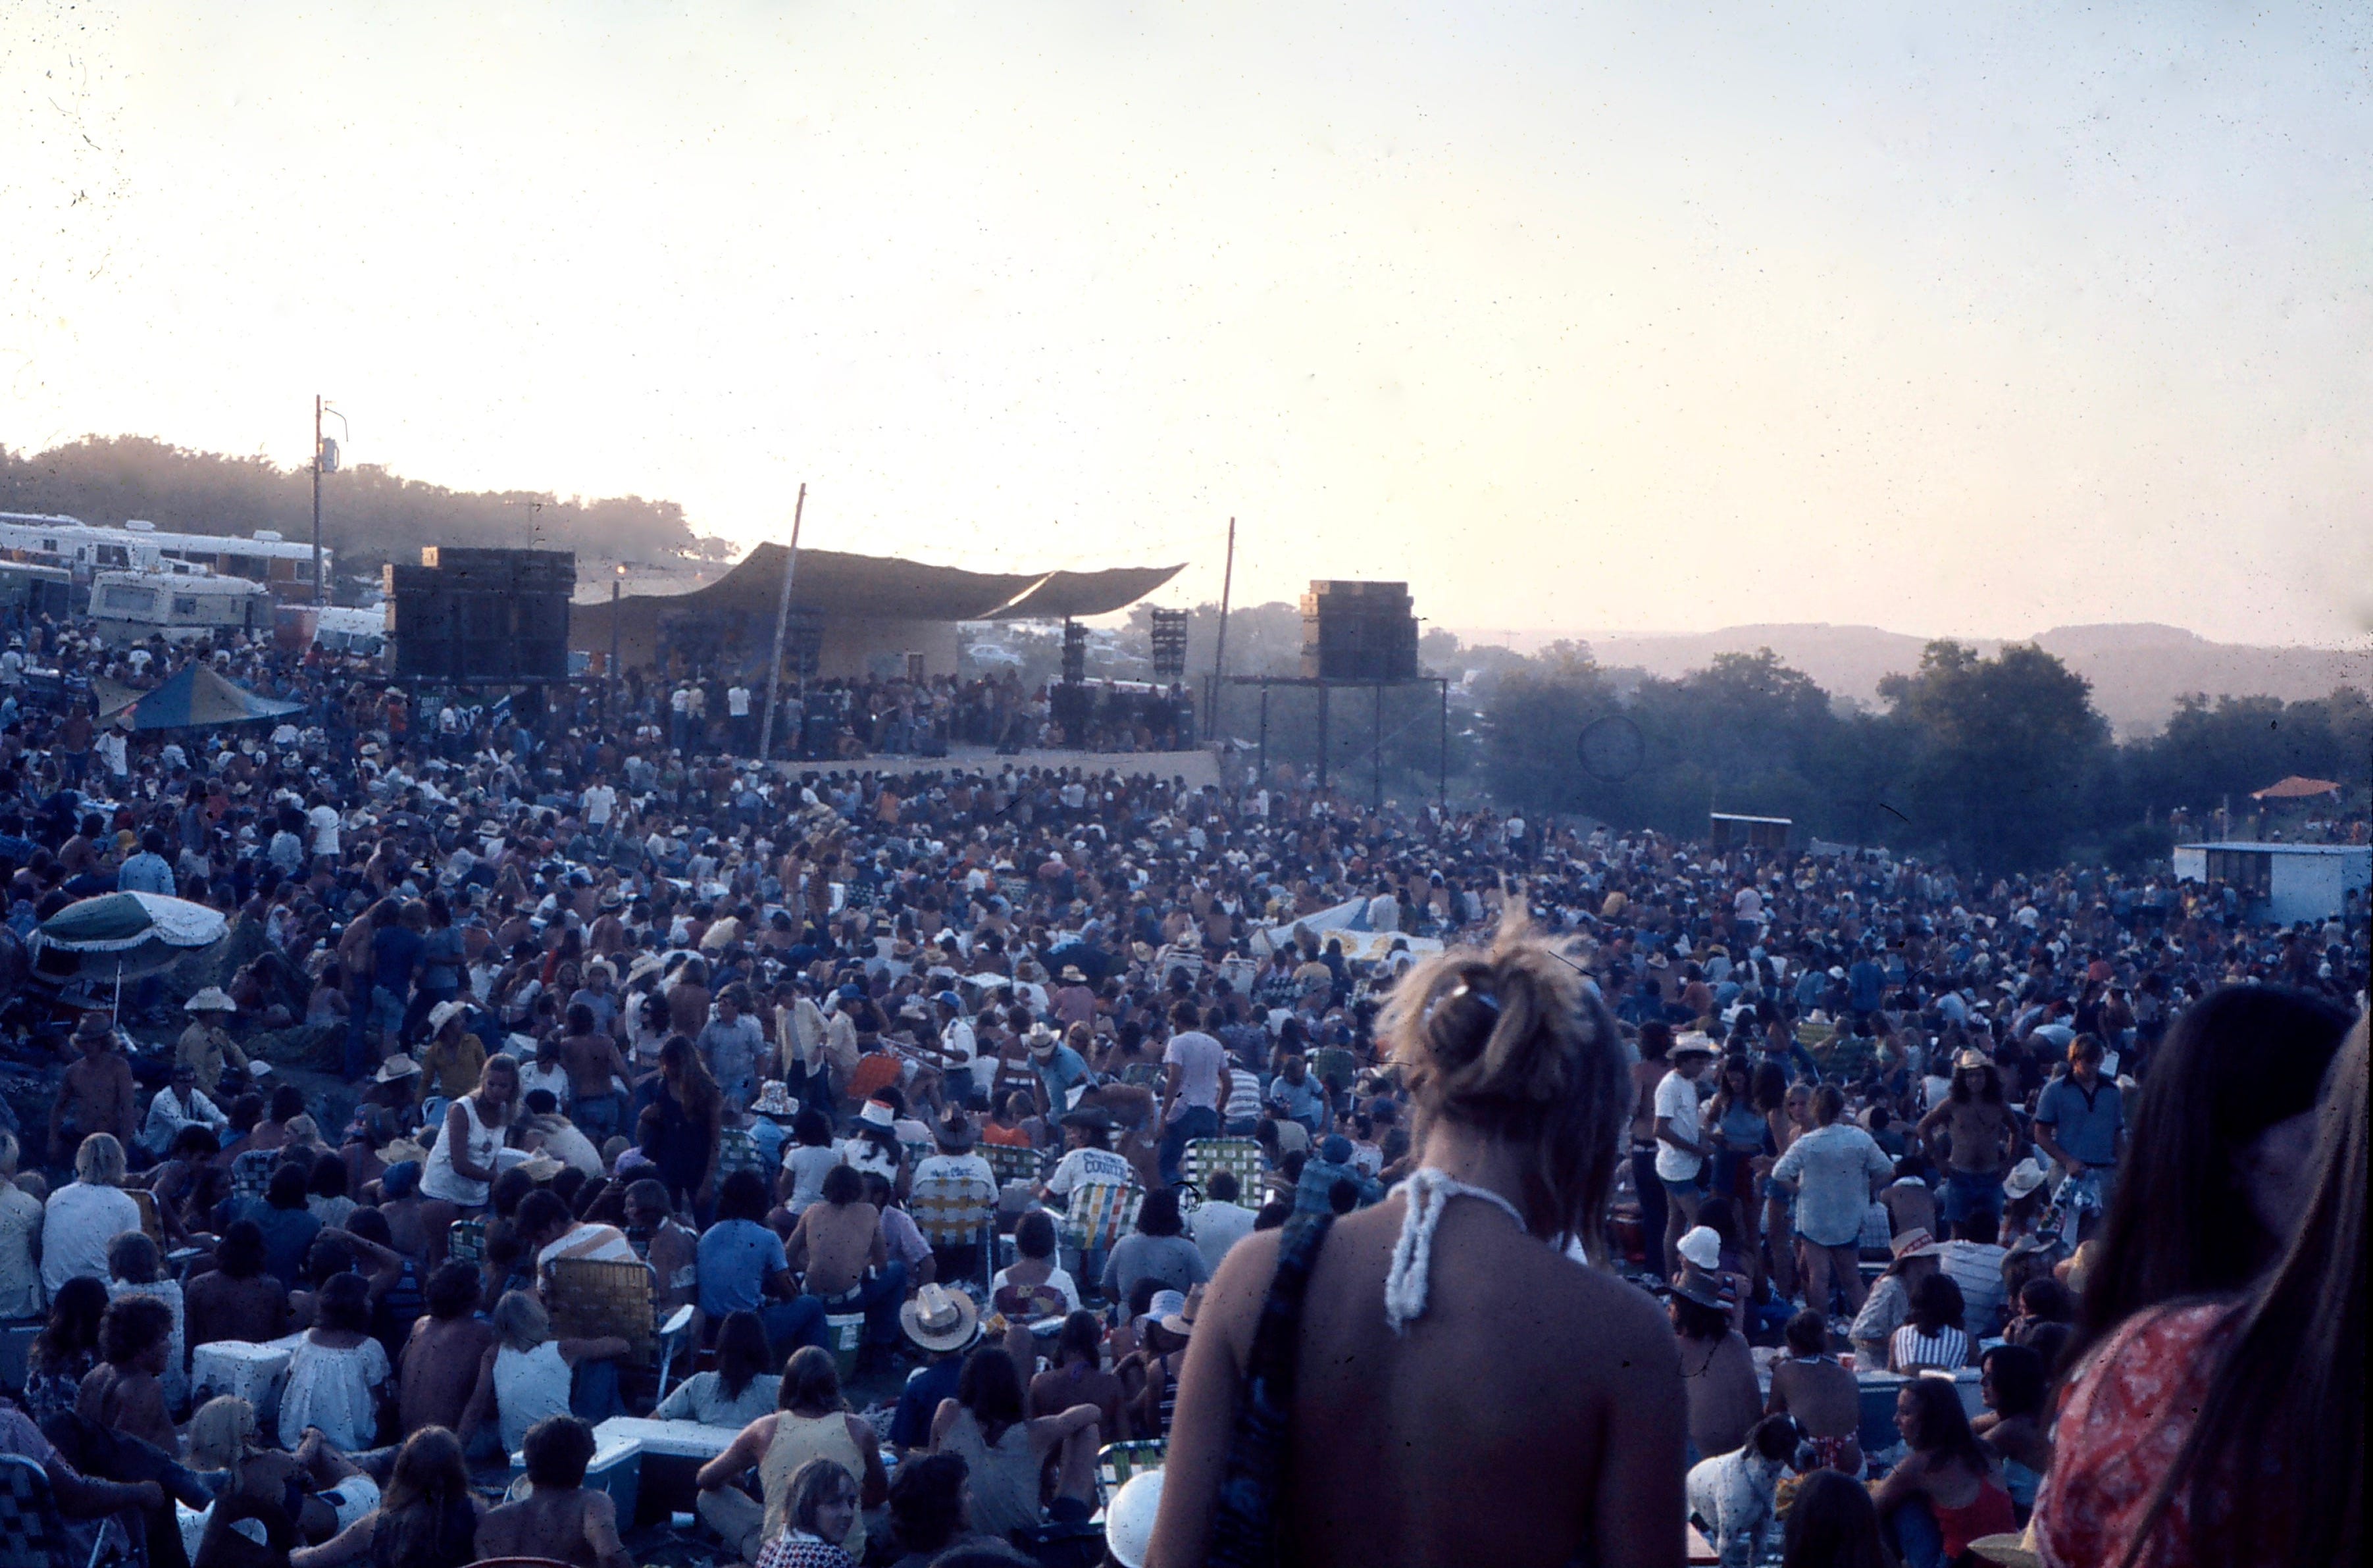 Austin Concerts of the '70s: Let's Take It Outside